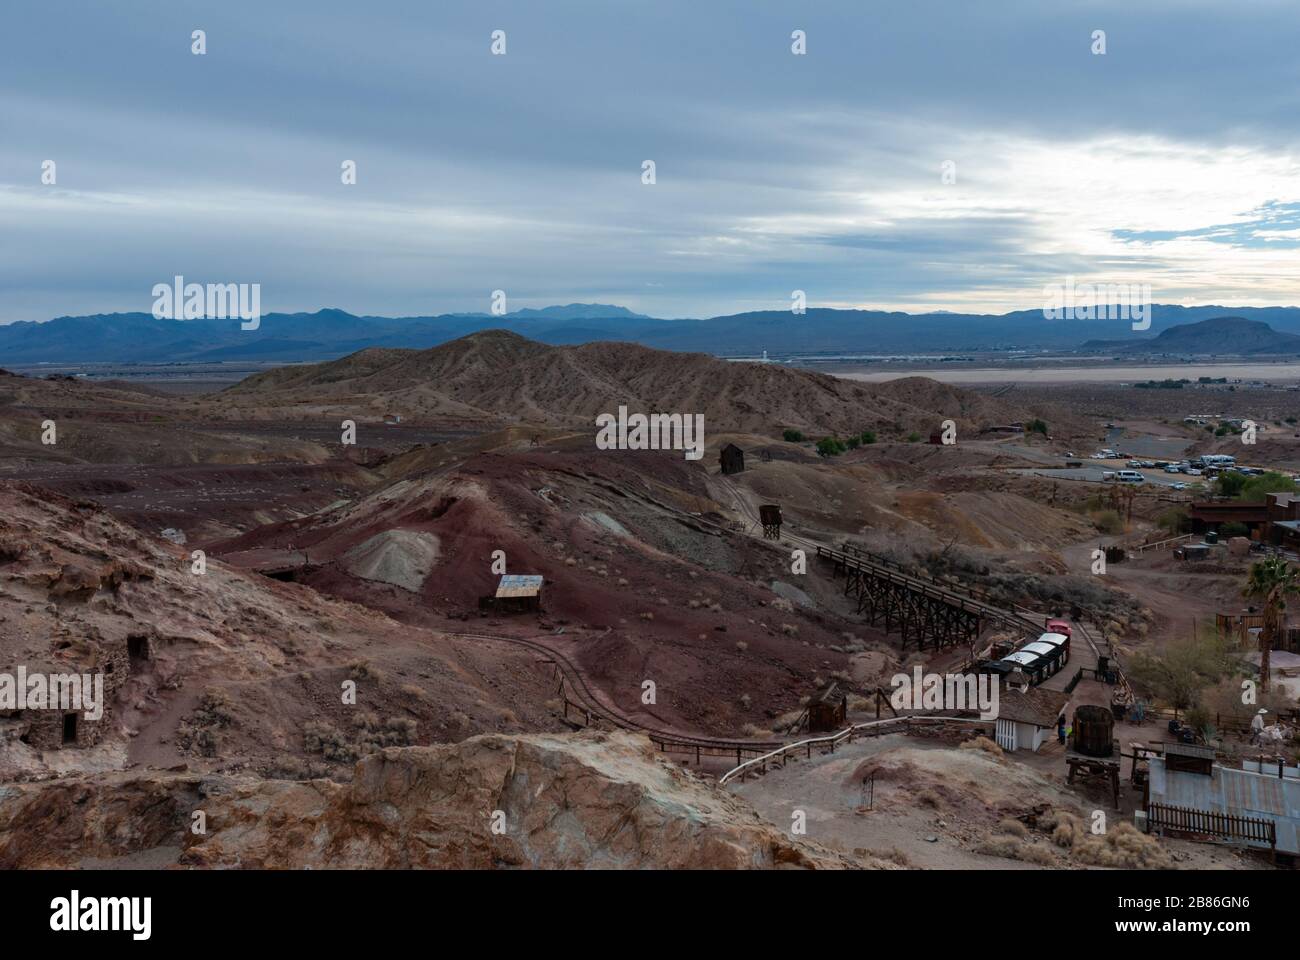 Calico Ghost town, view over the railroad and station. Mojave desert, California, USA Stock Photo